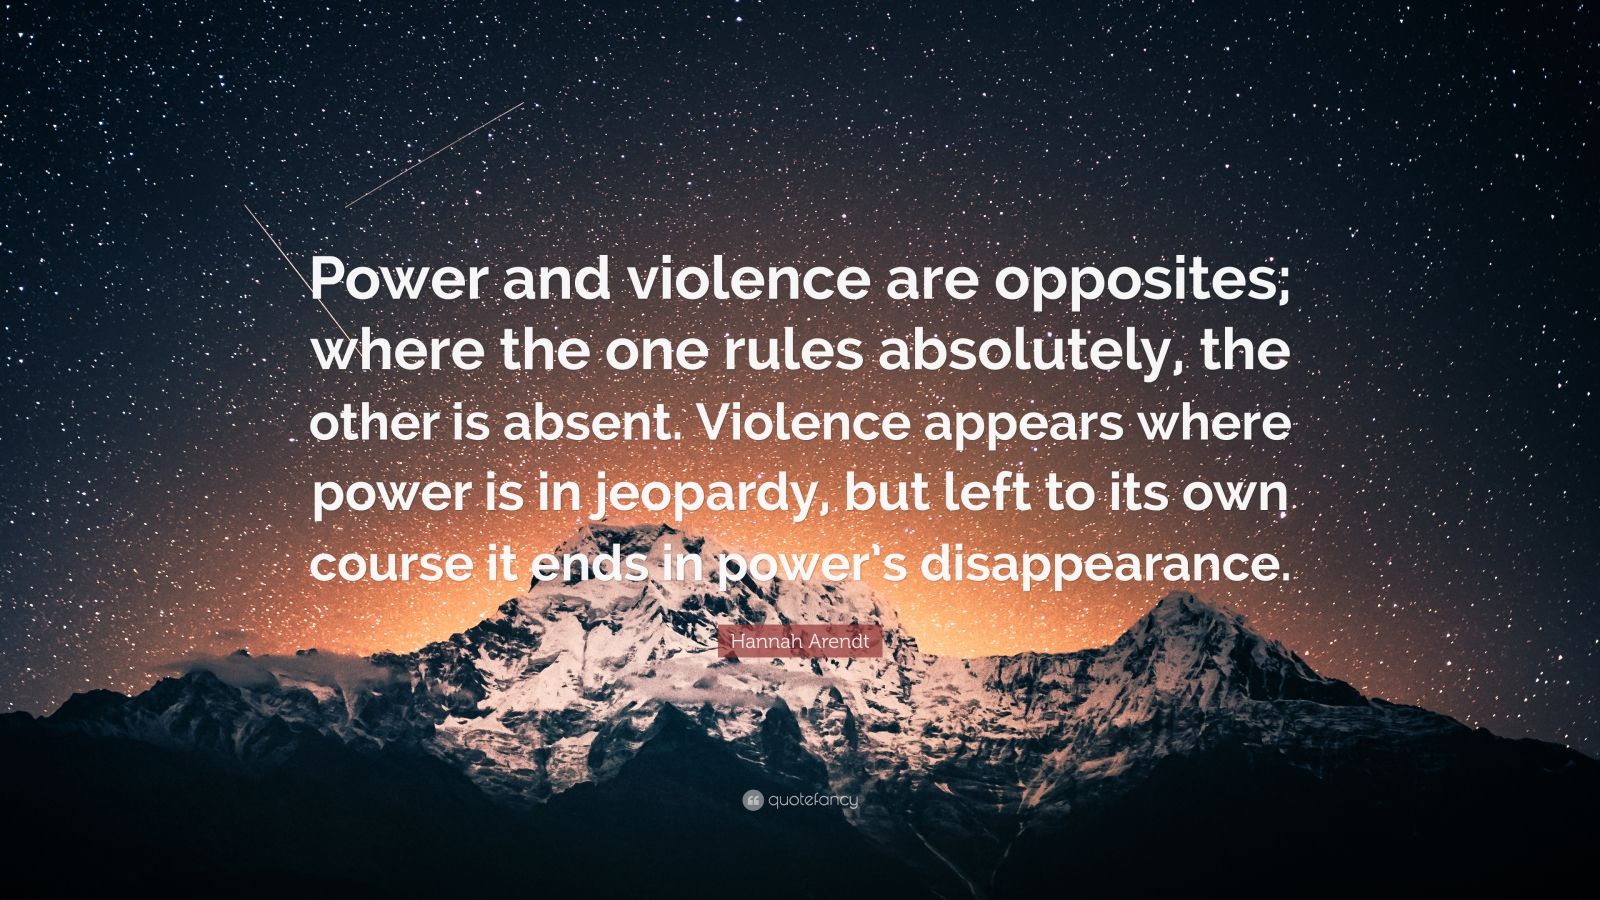 On Violence by Hannah Arendt